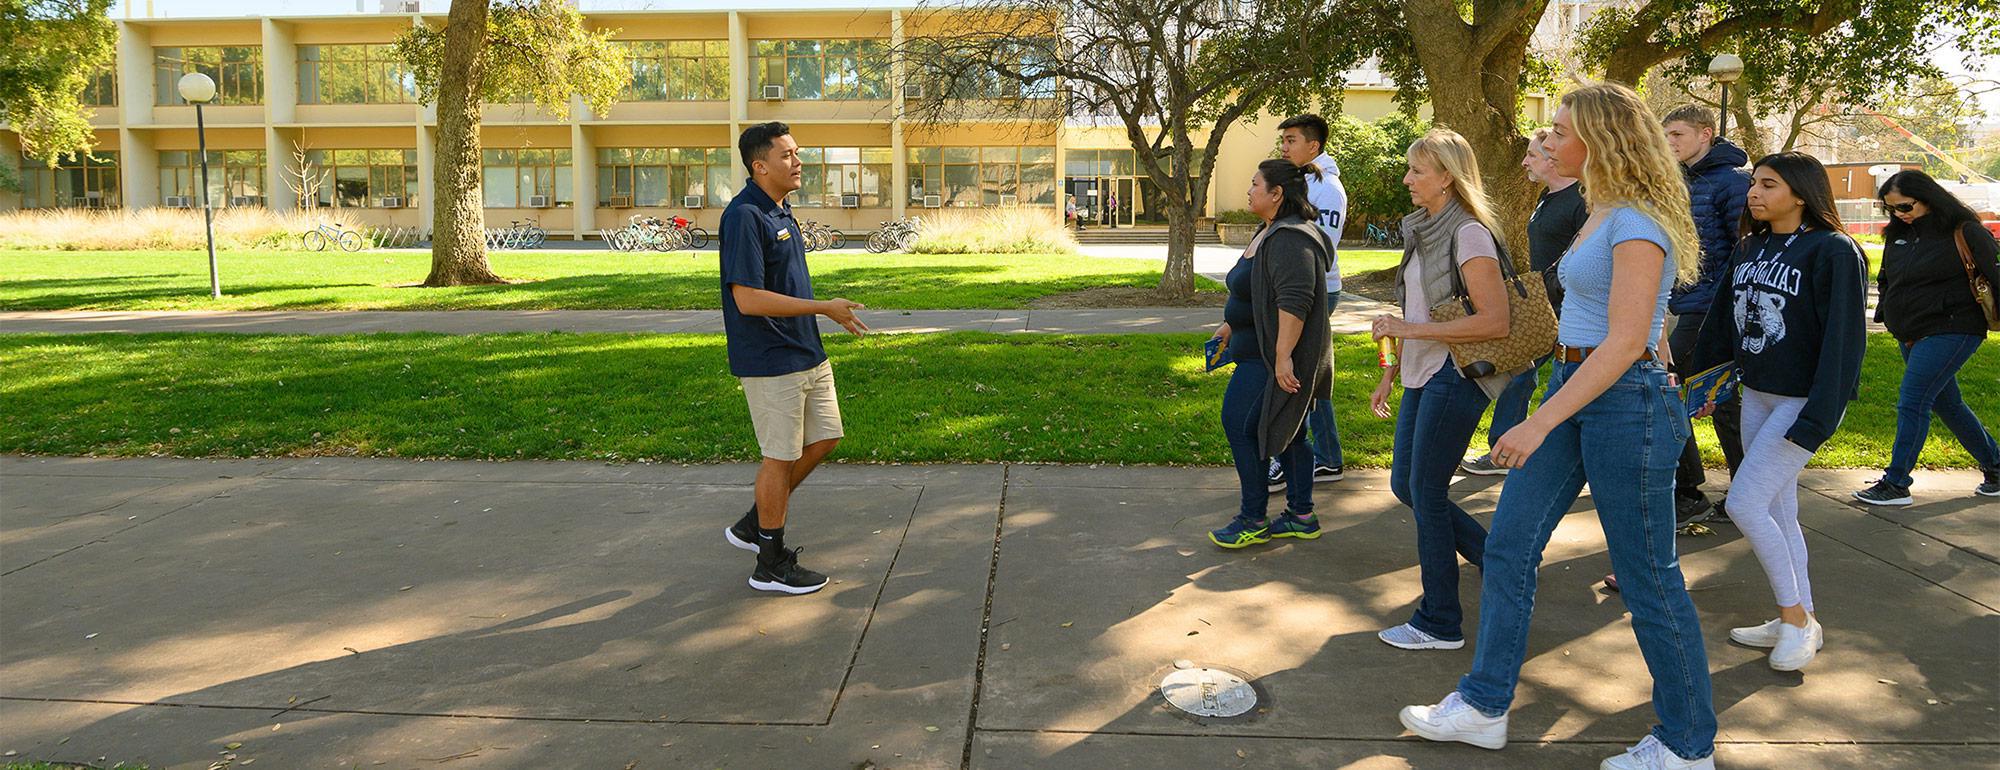 a student tour guide leading a group of people on a campus tour